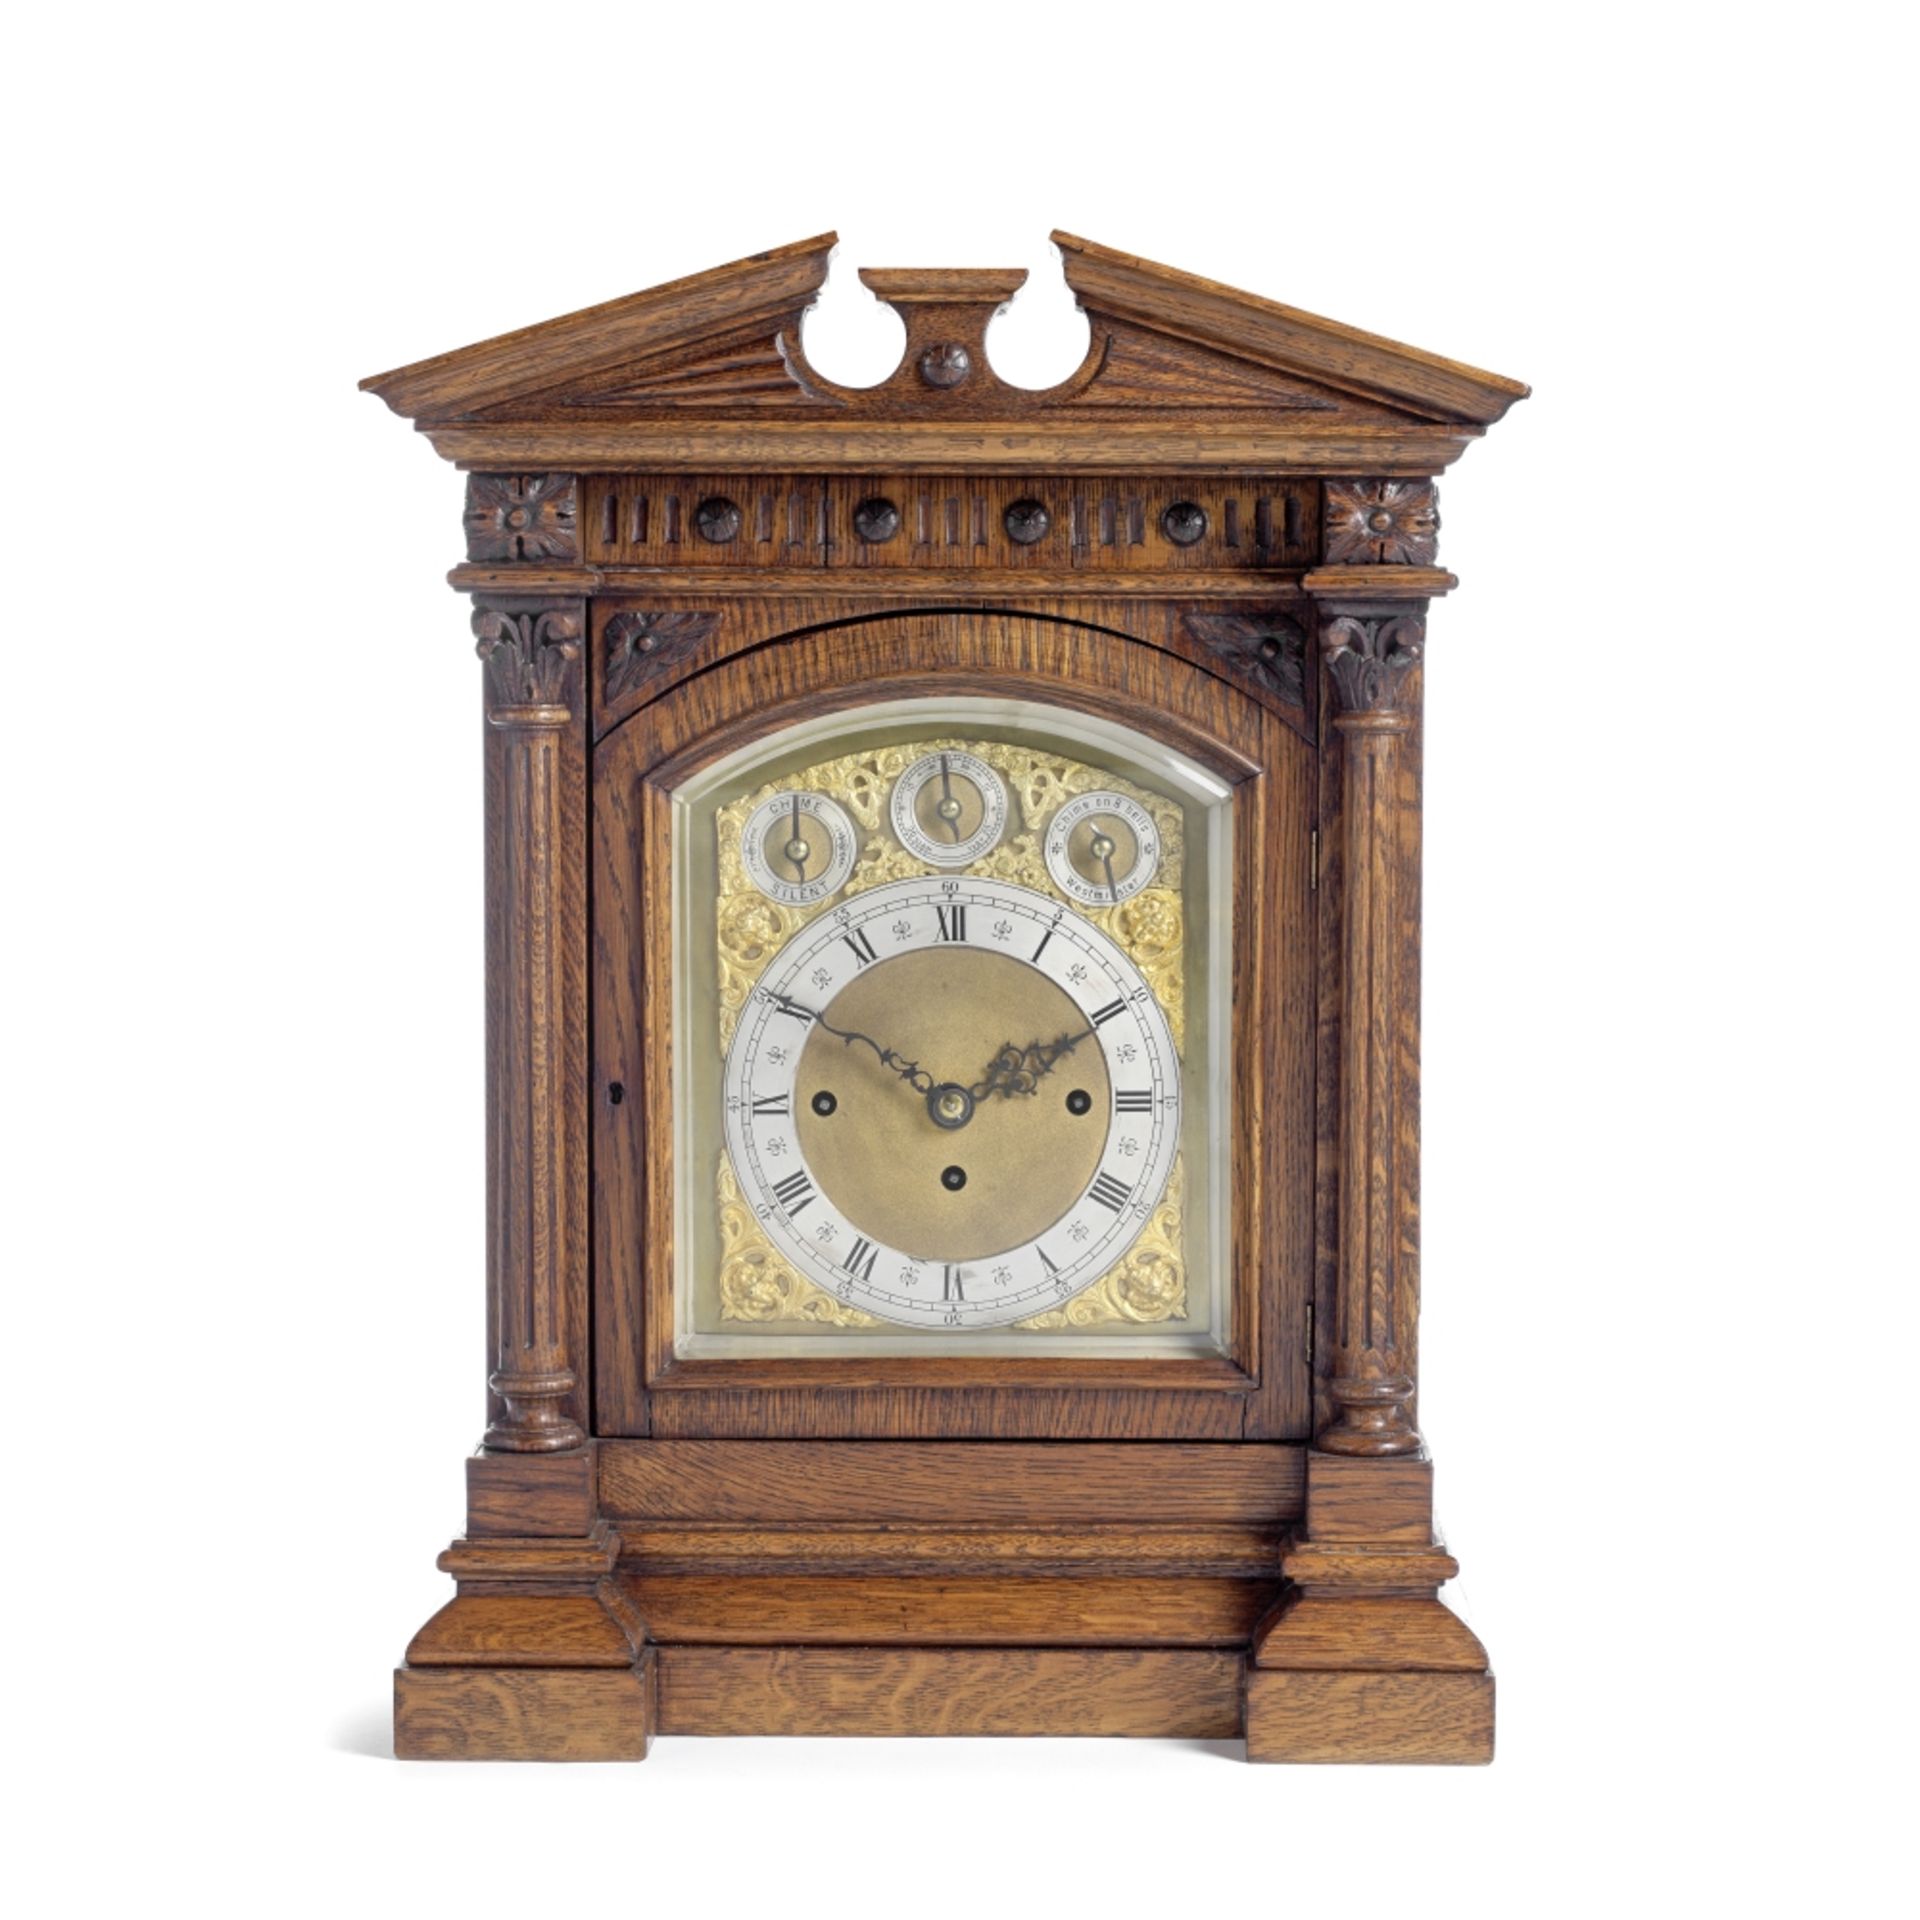 An impressive late 19th century Continental carved oak quarter chiming table clock